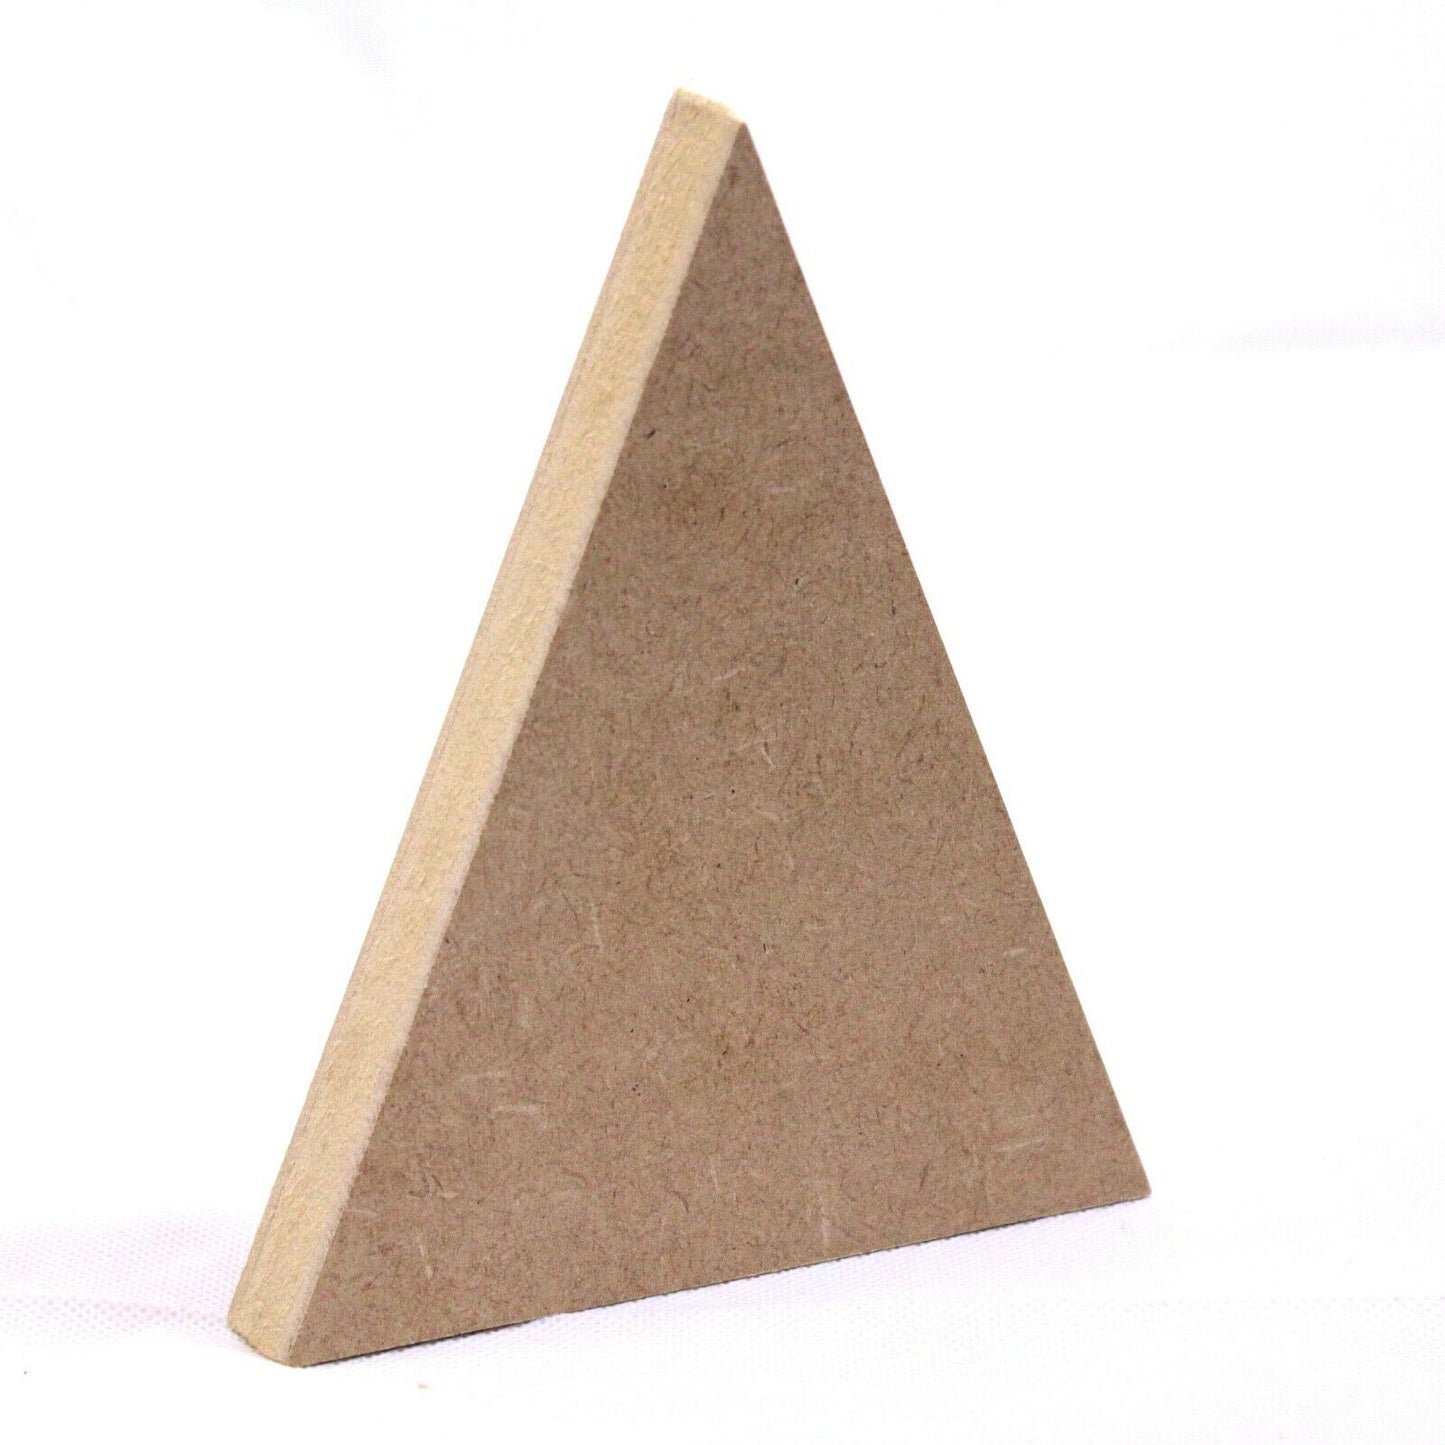 Free Standing 18mm MDF Mountain Craft Shape Various Sizes. 2 Shape Options.